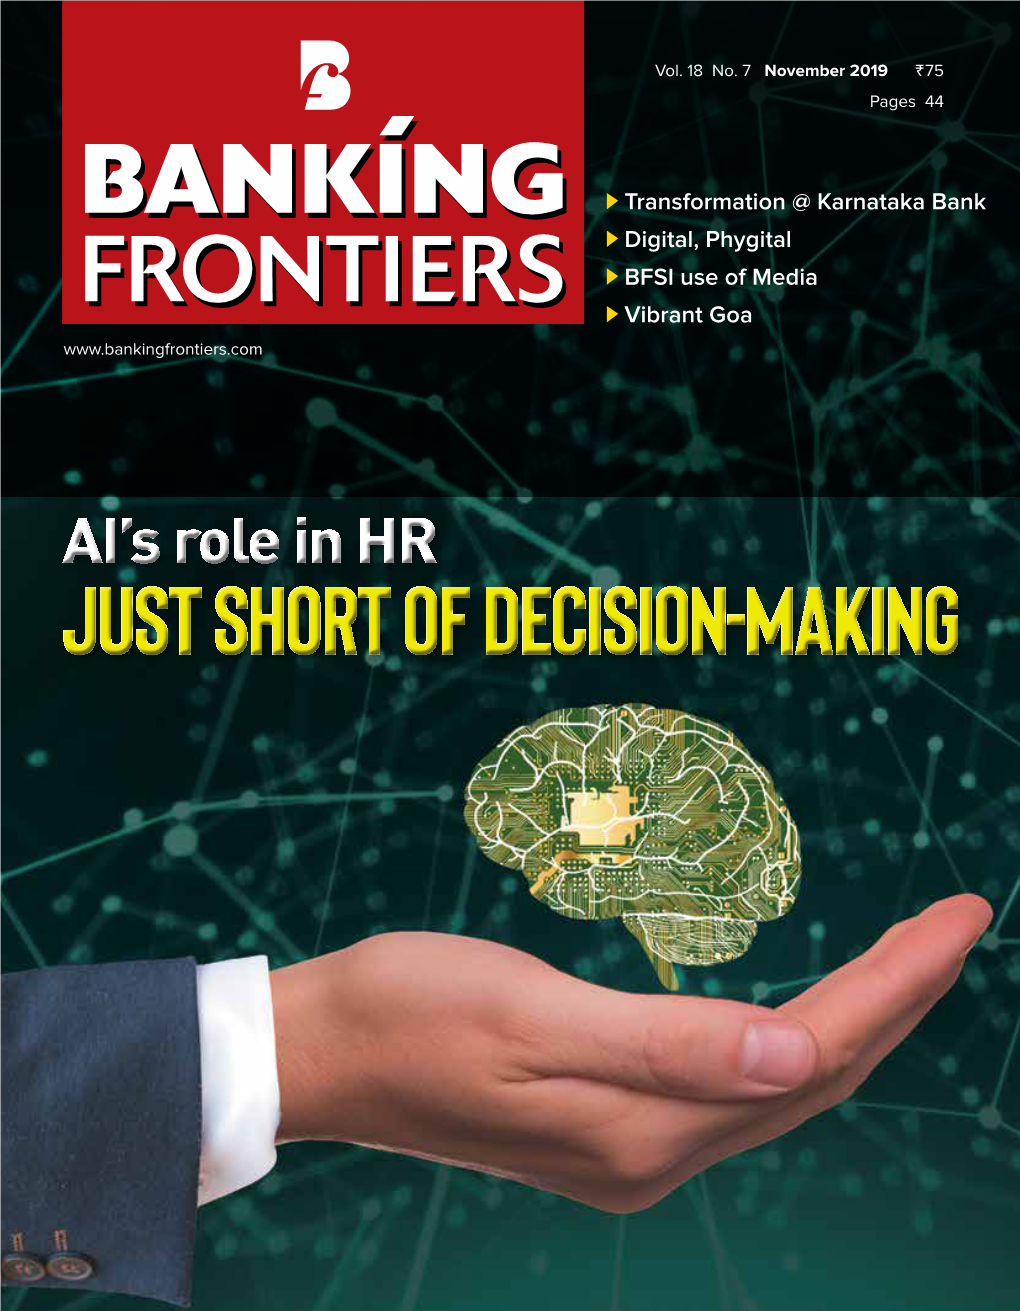 Banking Frontiers November 2019 3 HOUSING CONTENTS November 2019